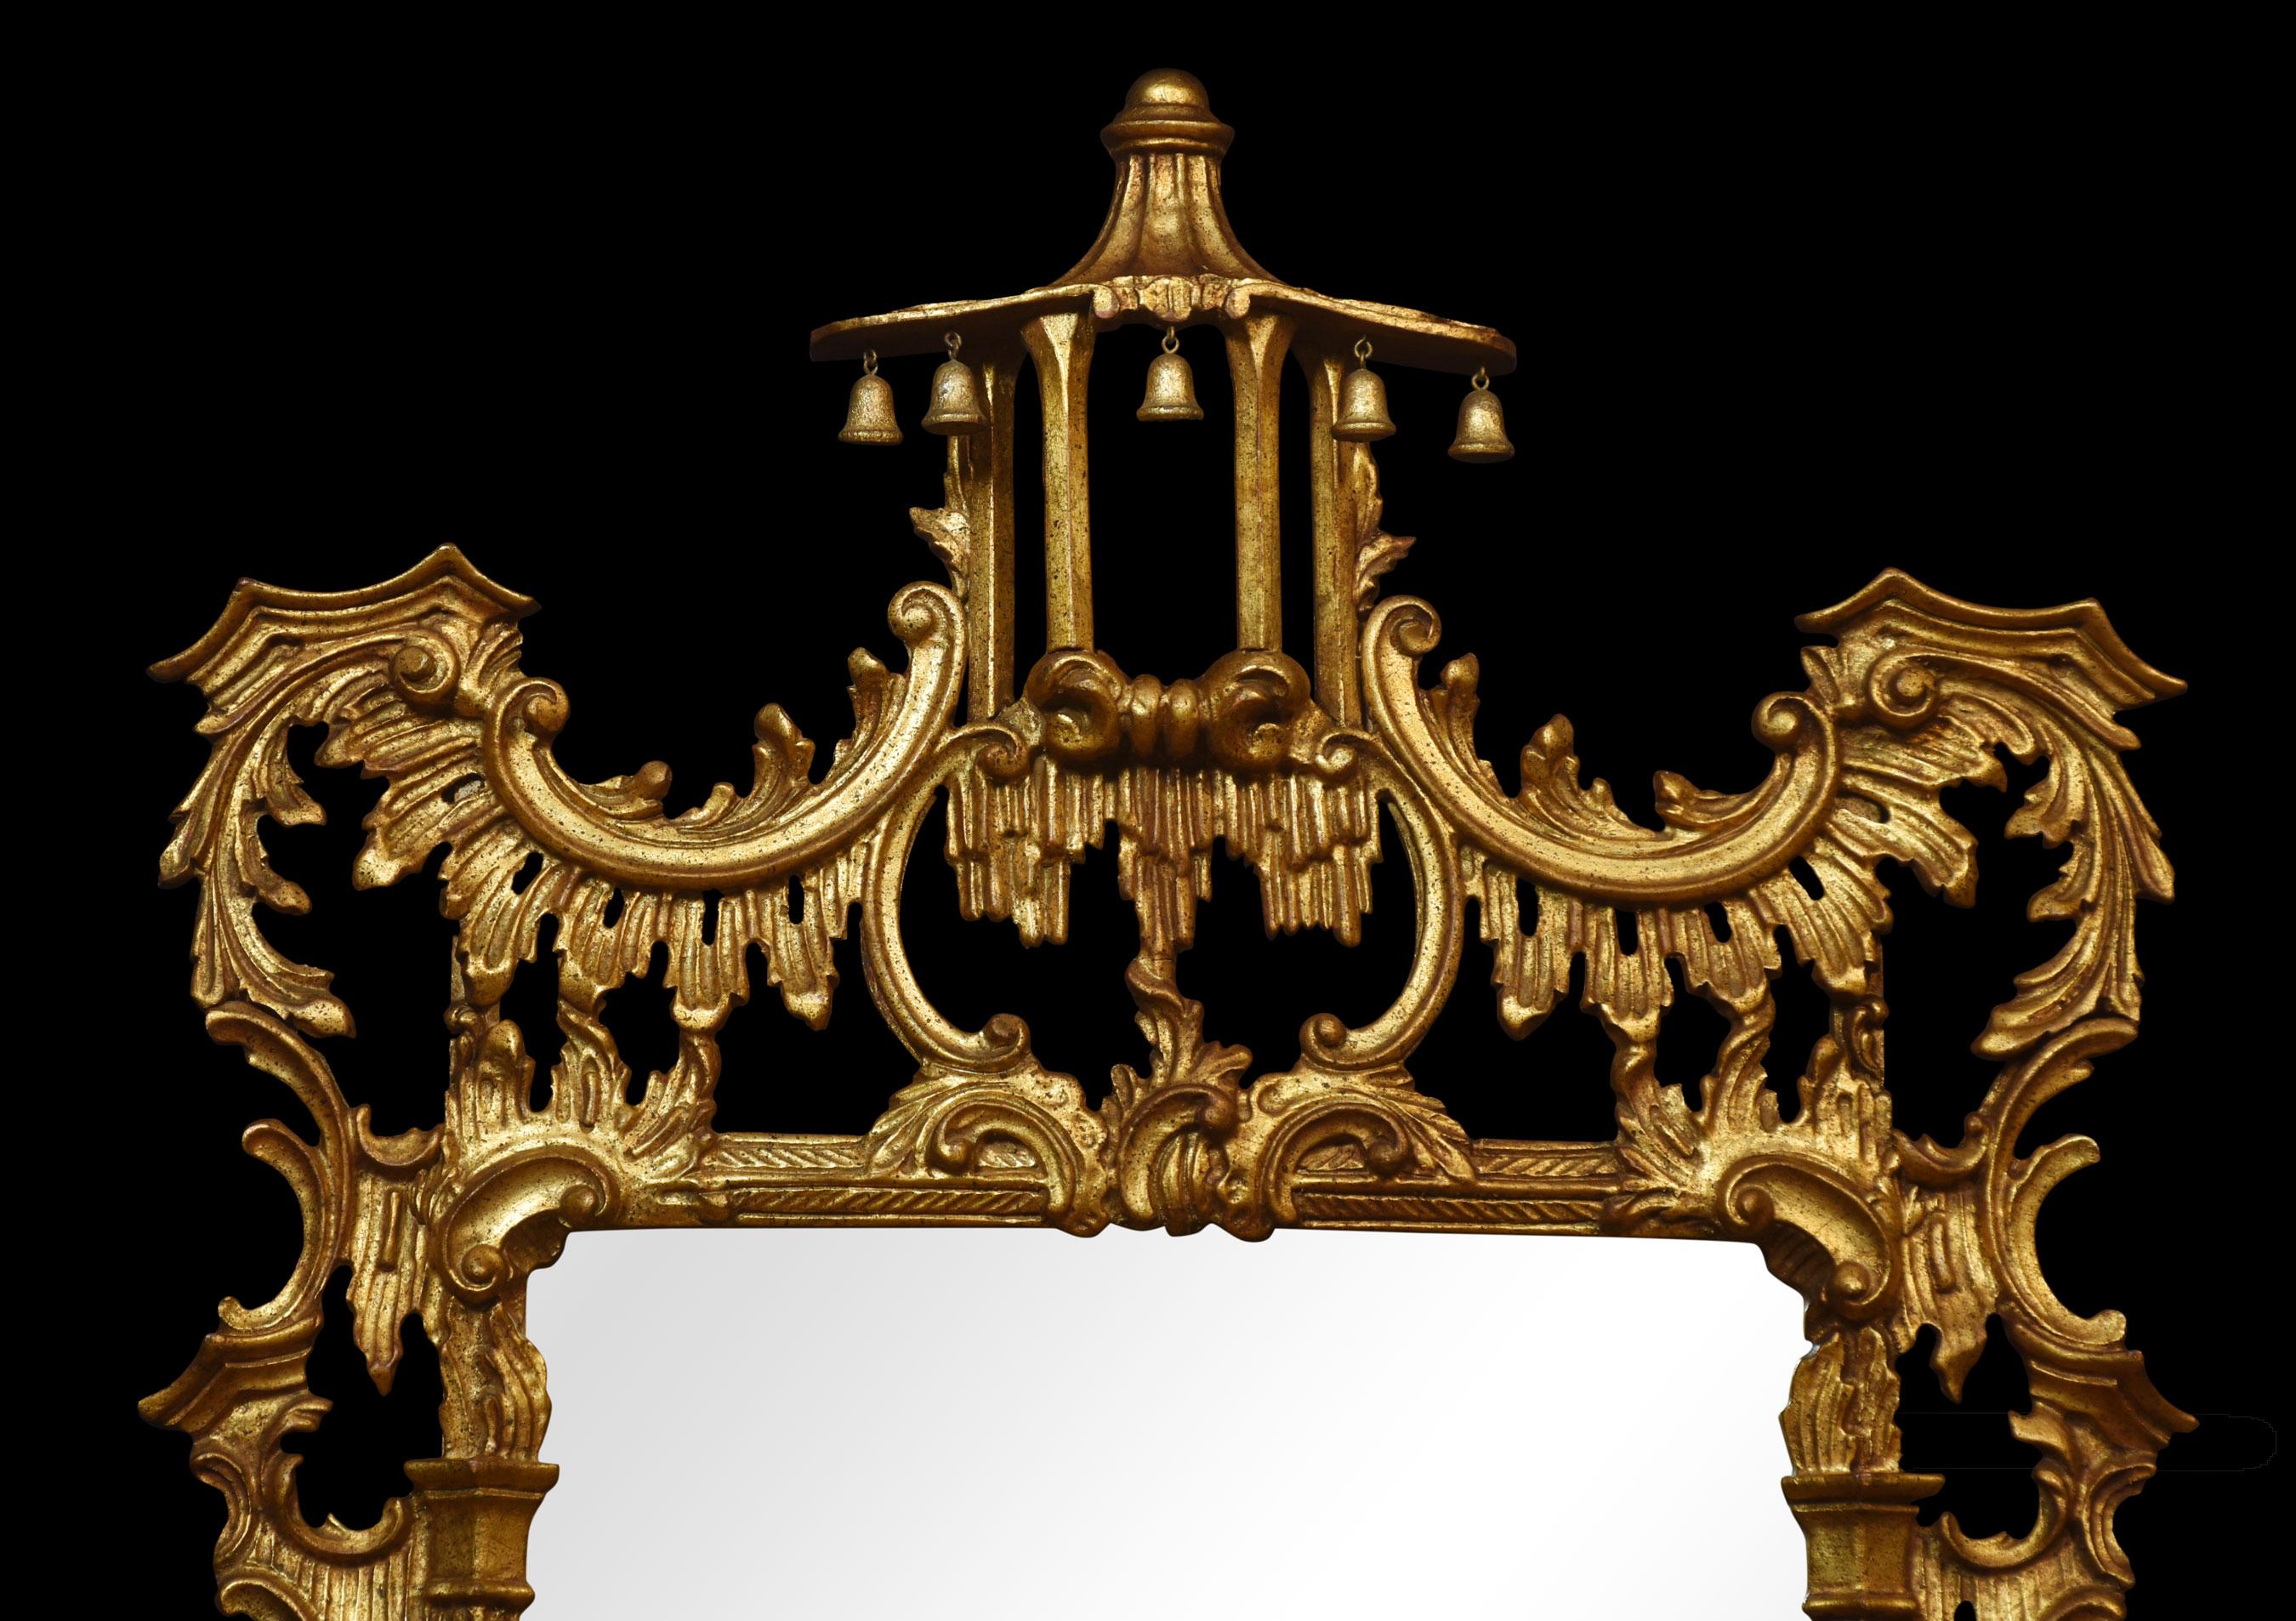 A Chinese Chippendale style carved giltwood wall mirror with pagoda surmount and hanging bells, above the original mirror plate, enclosed by carved frame of open rococo scrolls.
Dimensions
Height 63 Inches
Width 32 Inches
Depth 4.5 Inches